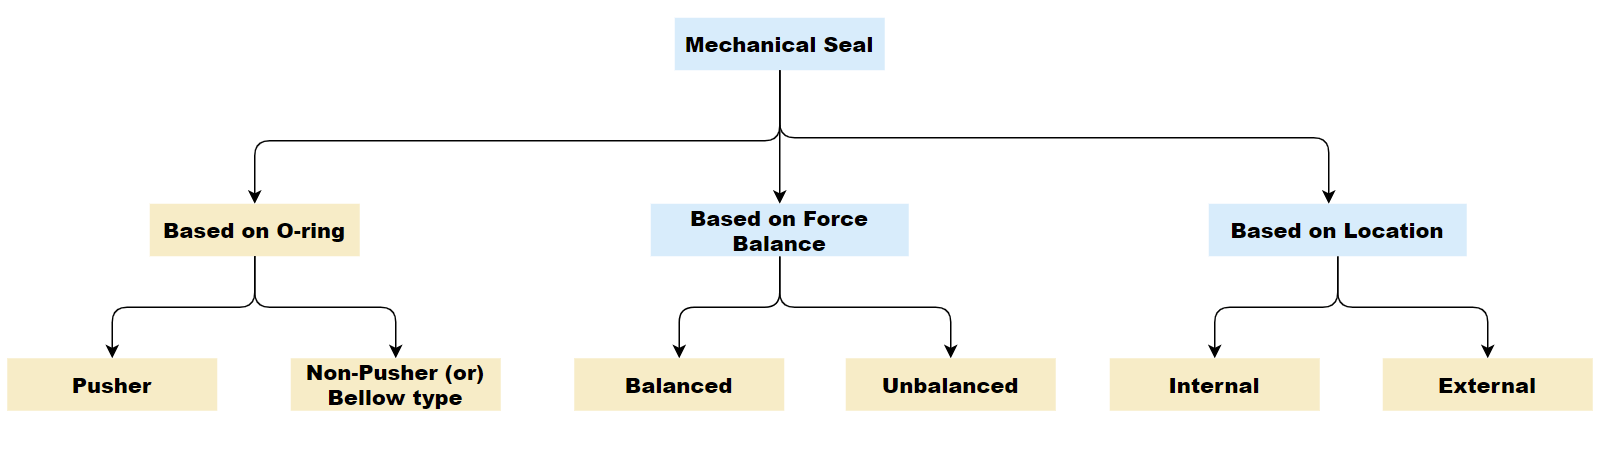 types of mechanical seals